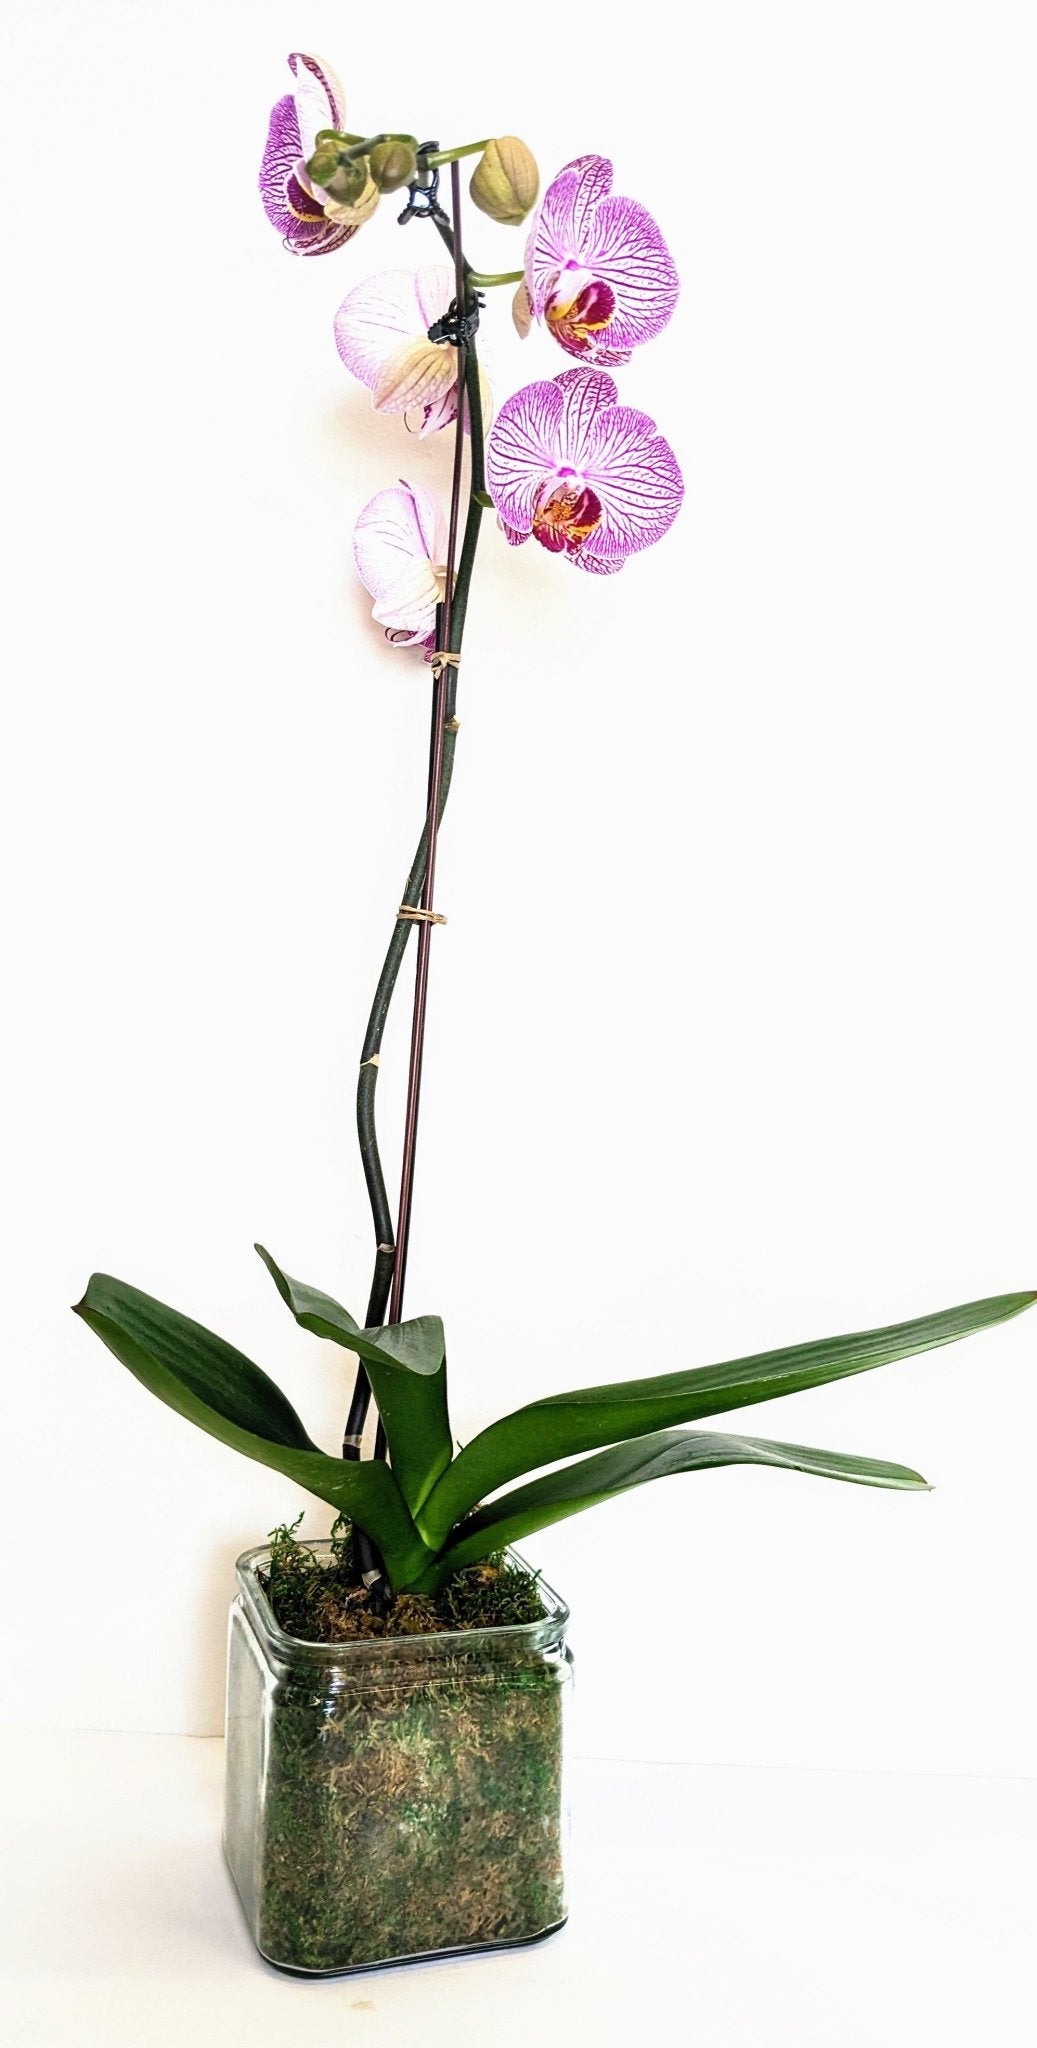 Purple Swirl Phalaenopsis Orchid - Floral_Arrangement - Flower Delivery NYC